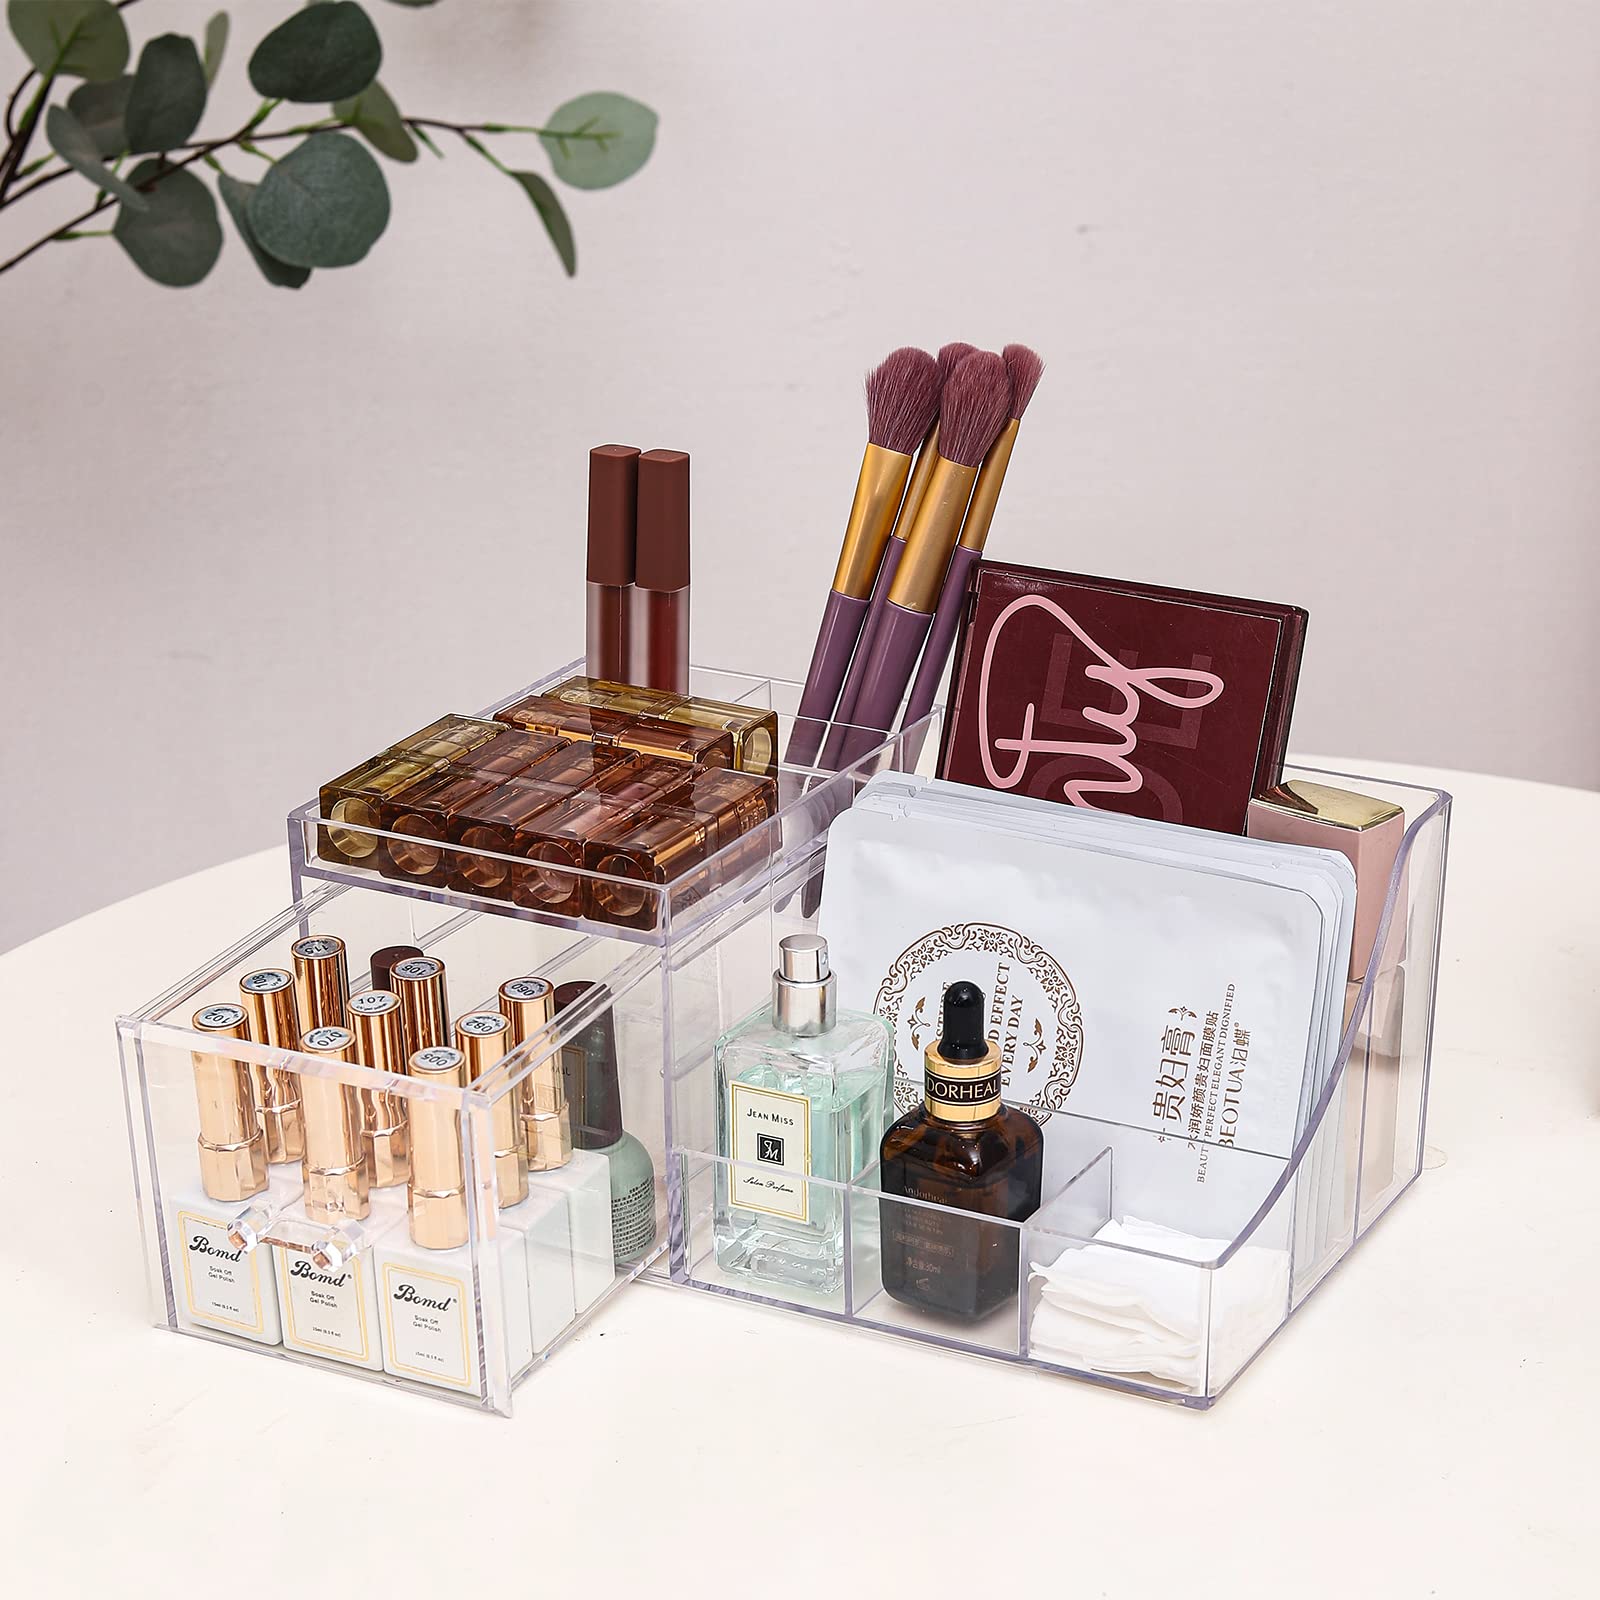 Clear Makeup Organizer With Drawers,Stackable Cosmetic Storage Display Case for Vanity,Bathroom Counter or Dresser,Countertop Holder for Lipstick,Brushes,Lotions,Eyeshadow,Nail Polish and Jewelry